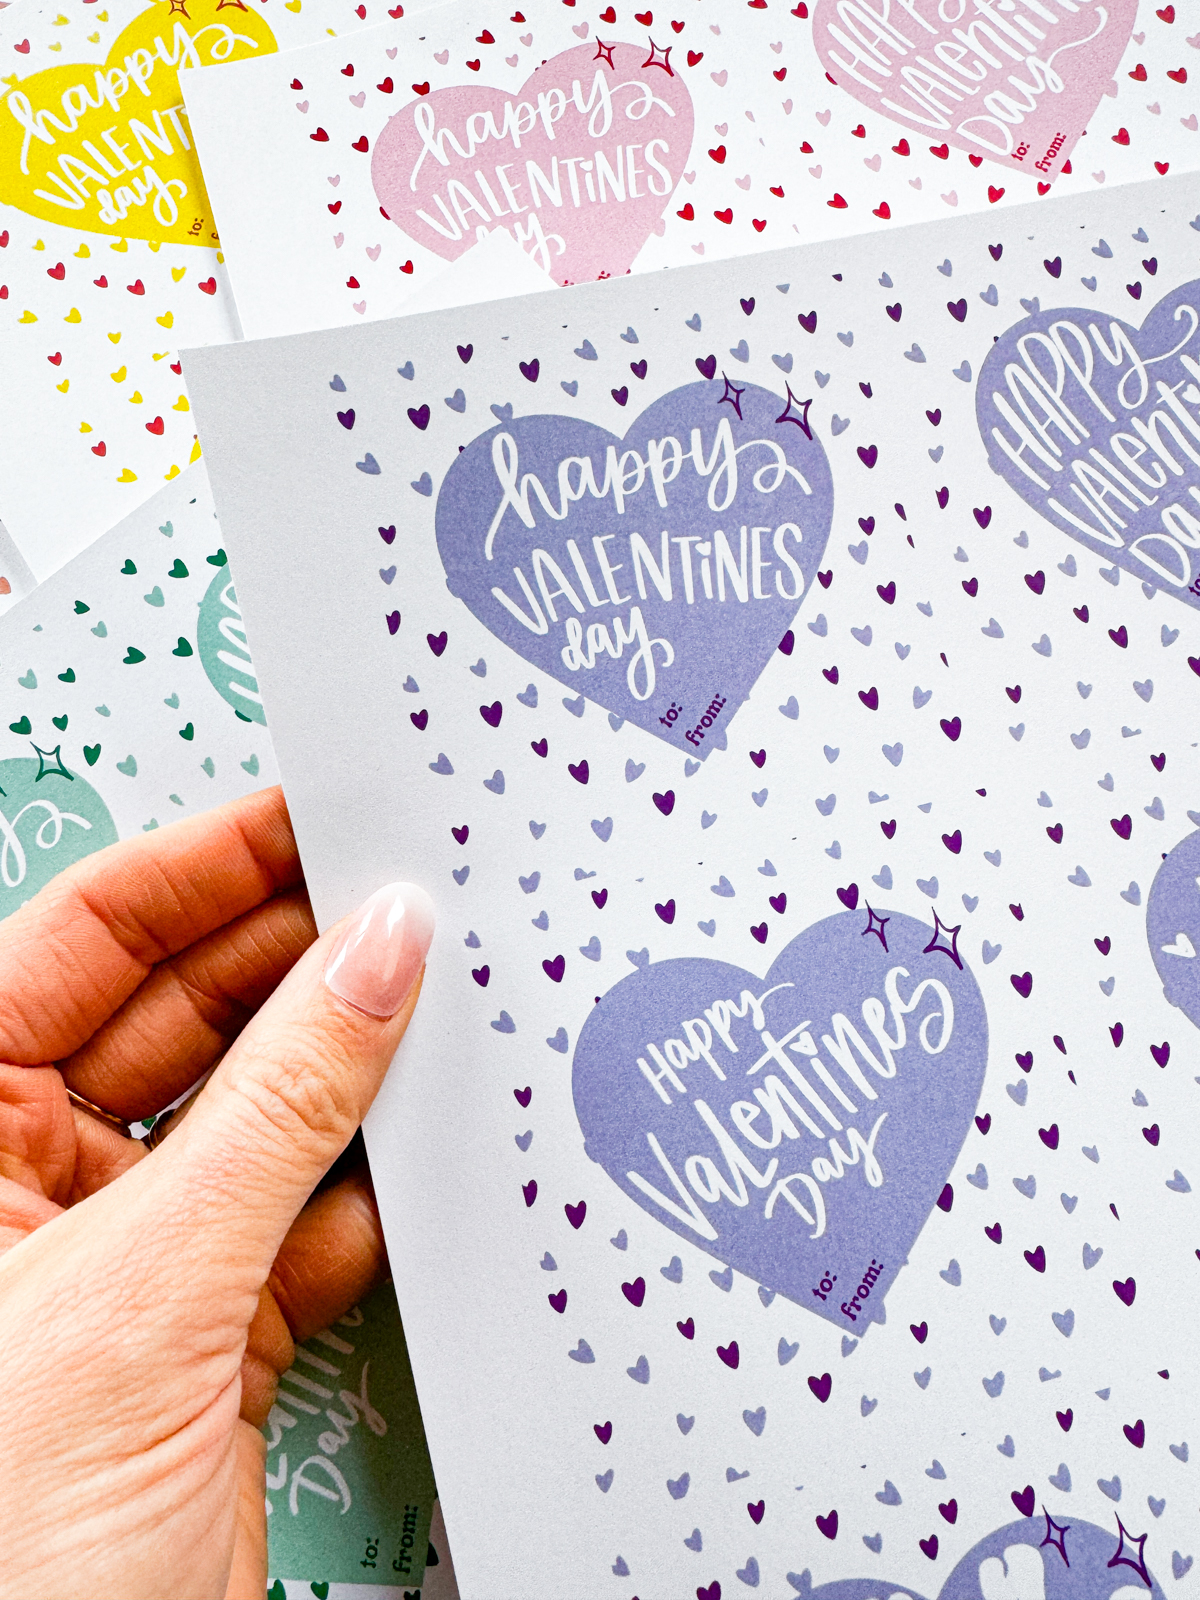 happy valentines day hand lettered valentines cards free printable shown printed off but not yet cut to size. 6 color schemes available, purple is focus of image